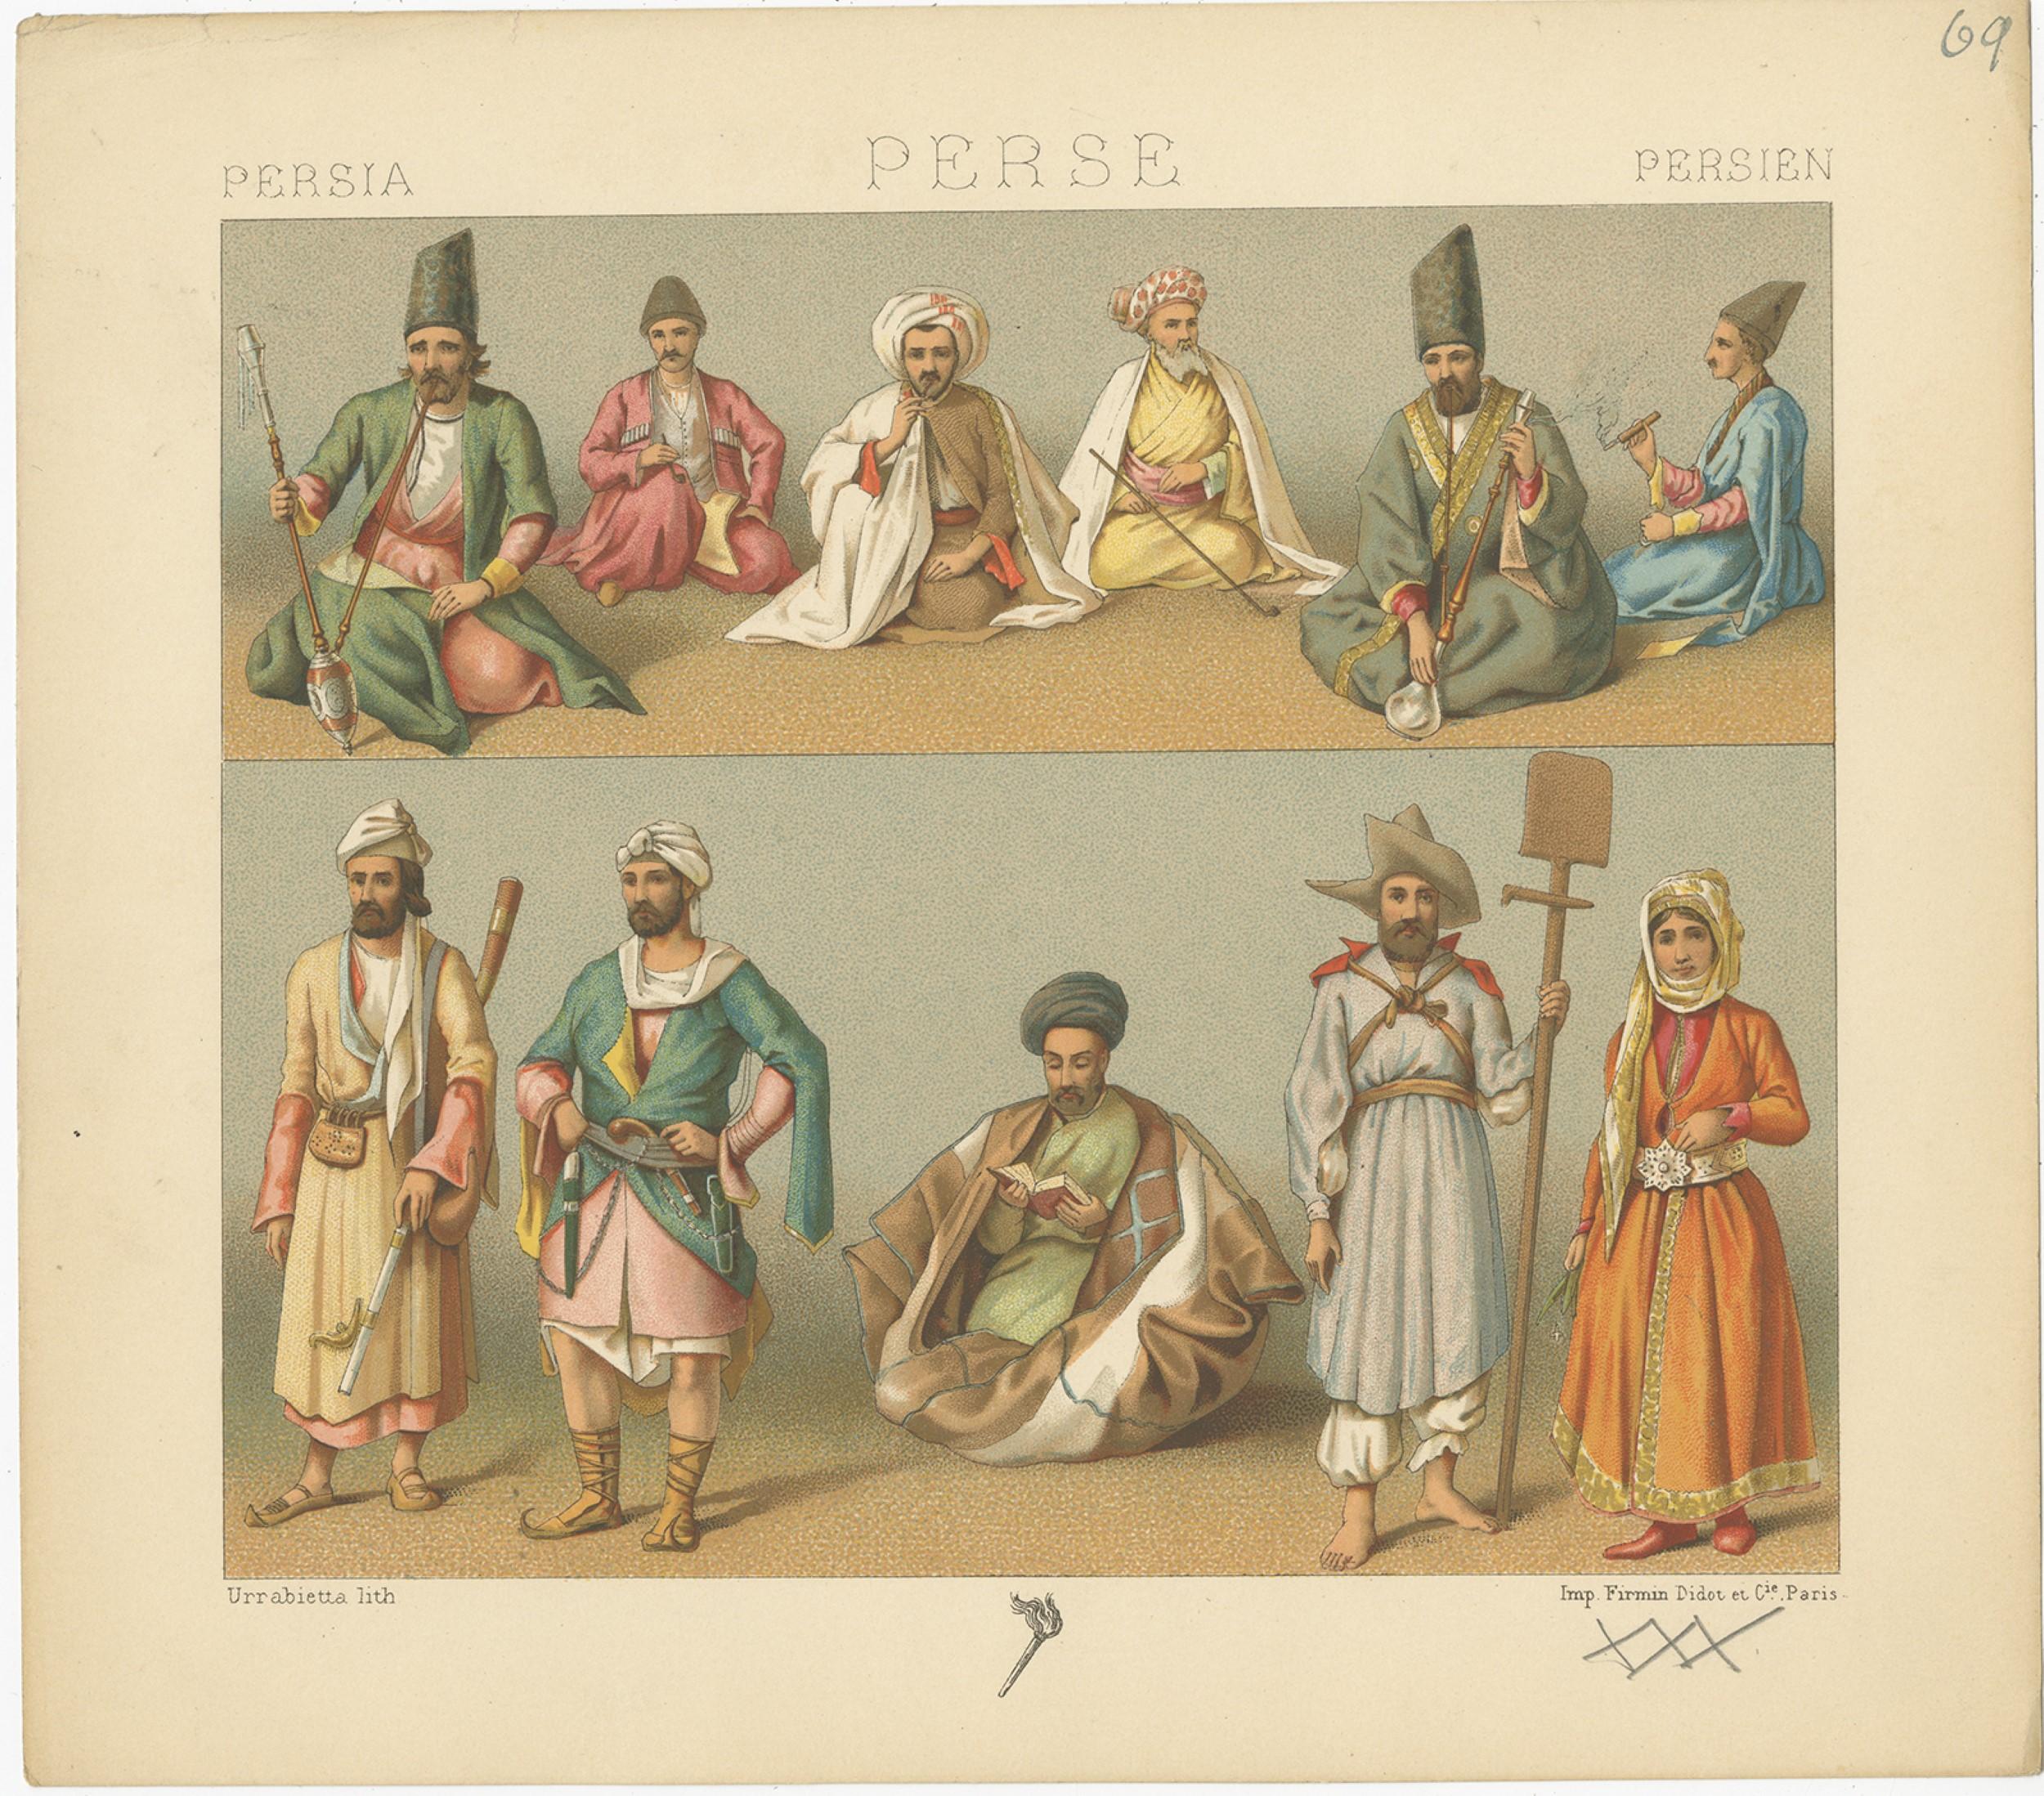 Antique print titled 'Persia - Perse - Persien'. Chromolithograph of Persian costumes. This print originates from 'Le Costume Historique' by M.A. Racinet. Published, circa 1880.